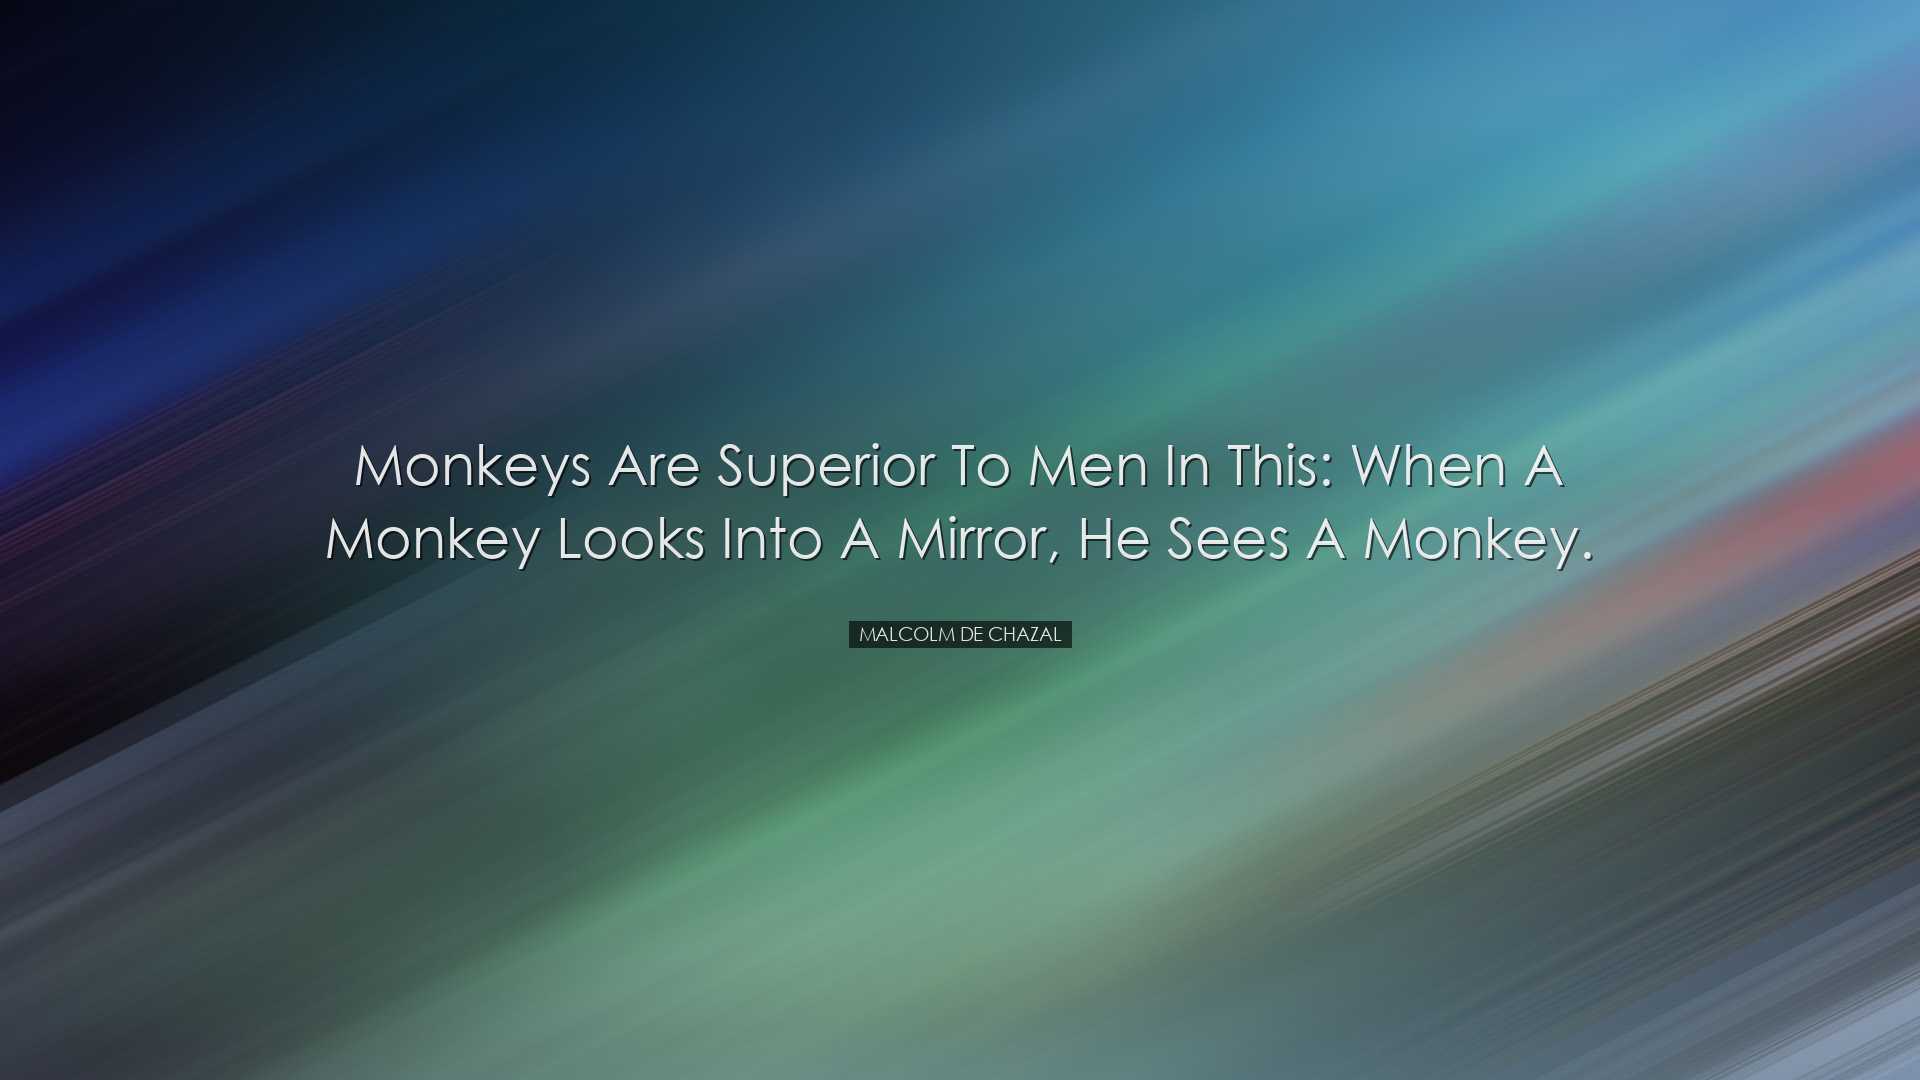 Monkeys are superior to men in this: When a monkey looks into a mi